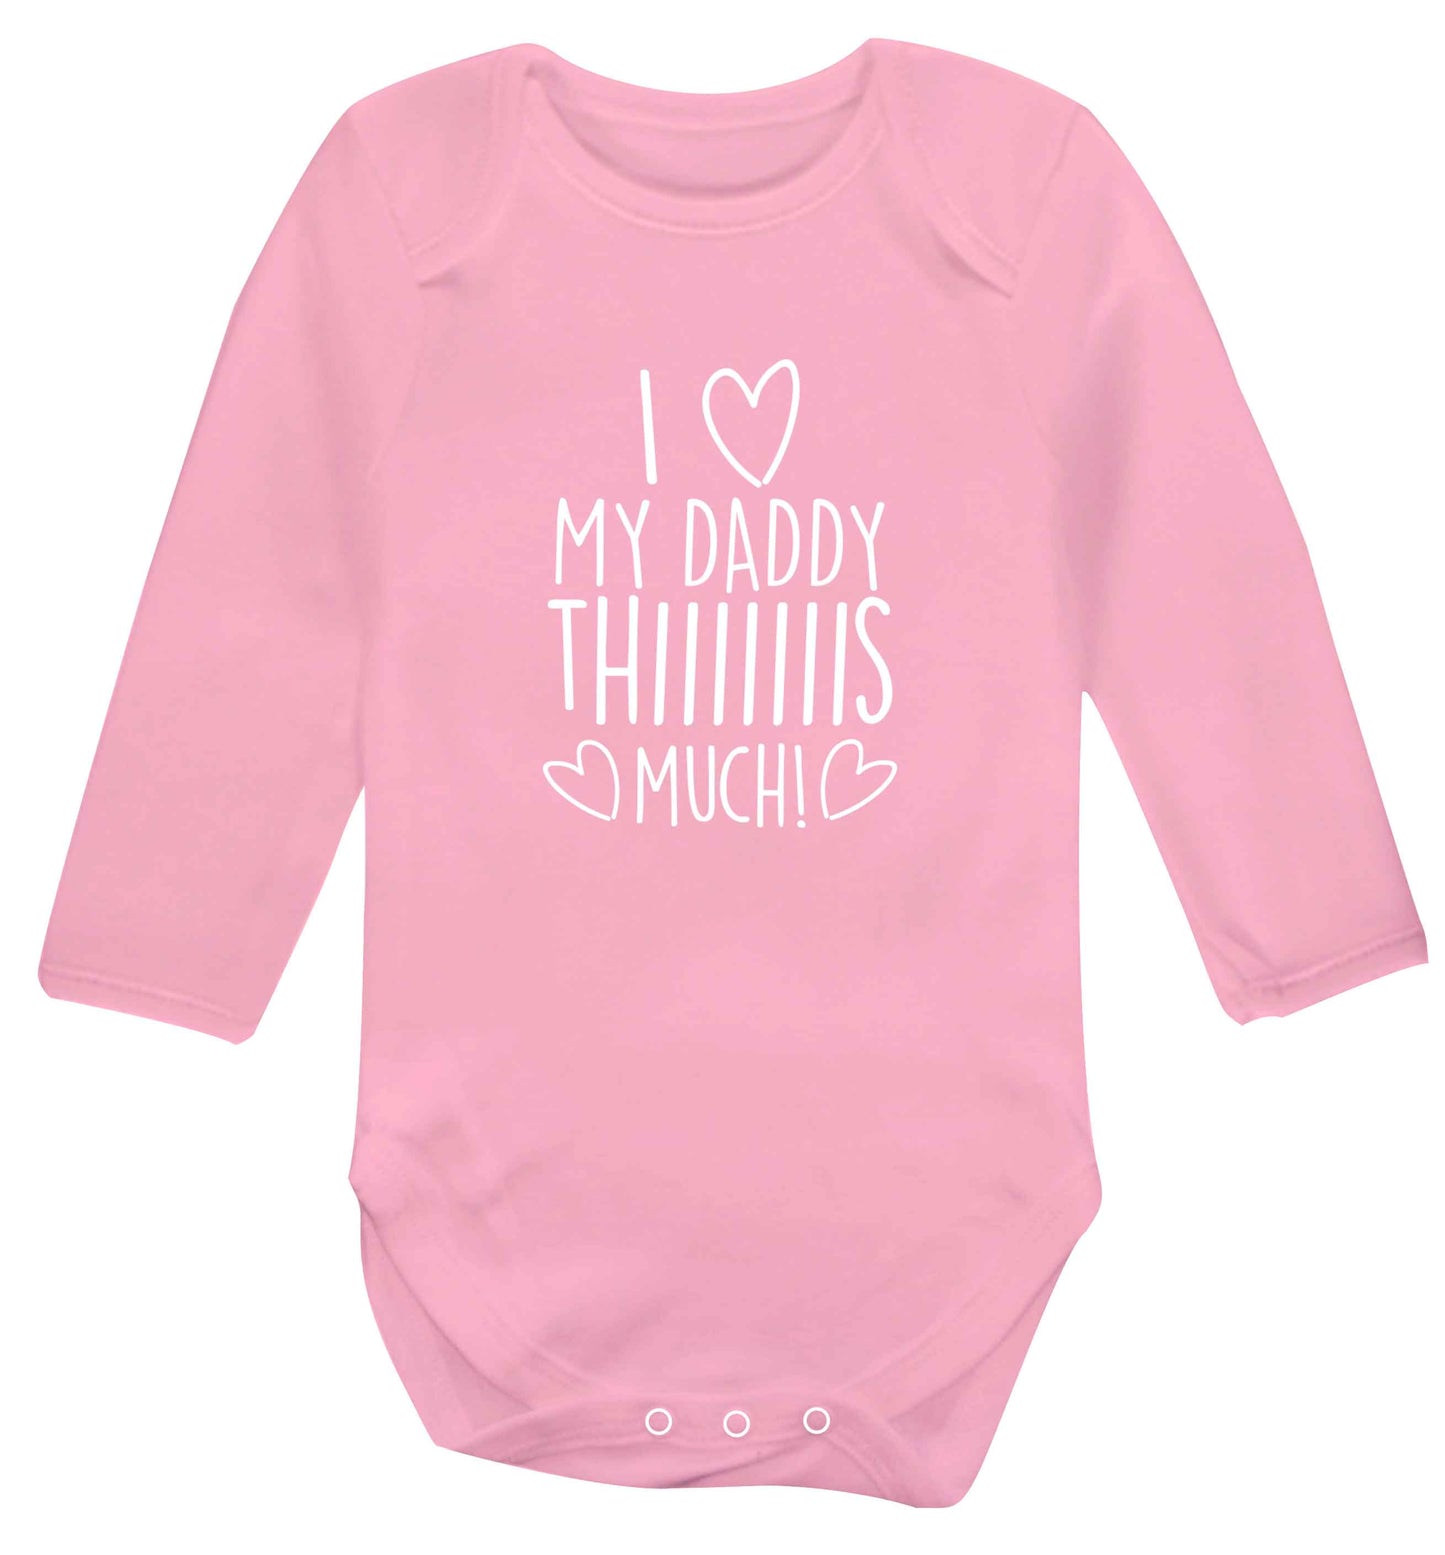 I love my daddy thiiiiis much! baby vest long sleeved pale pink 6-12 months